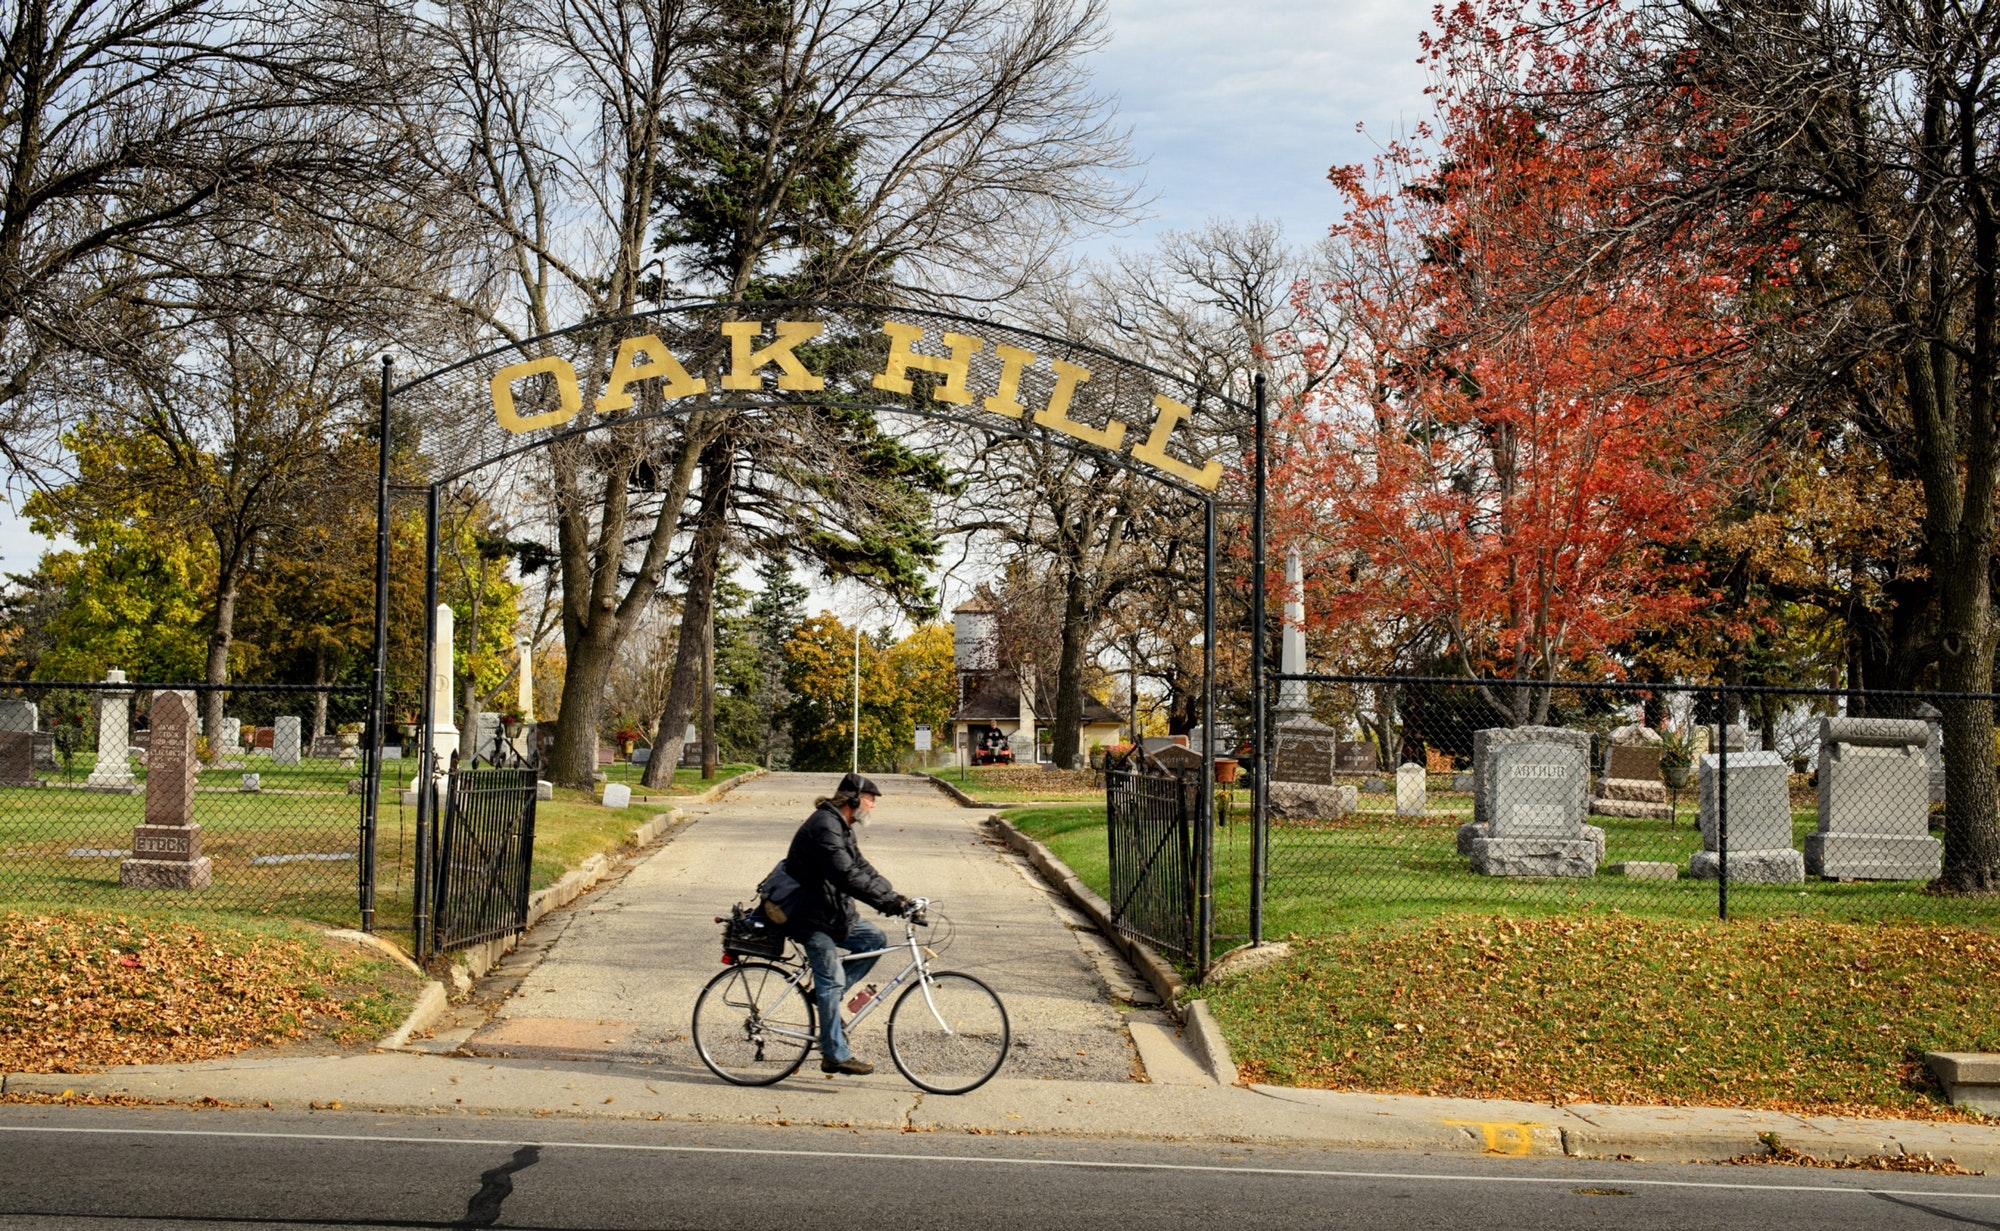 Photos: As cities grow, cemeteries become part of urban landscape ...